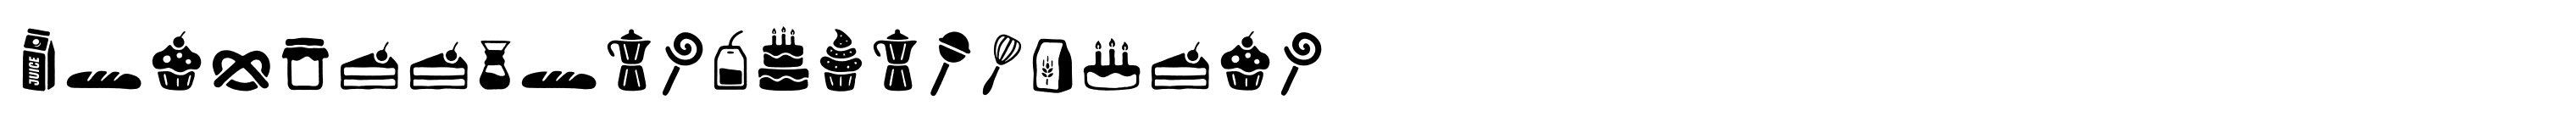 Zing Goodies Bakery Icons